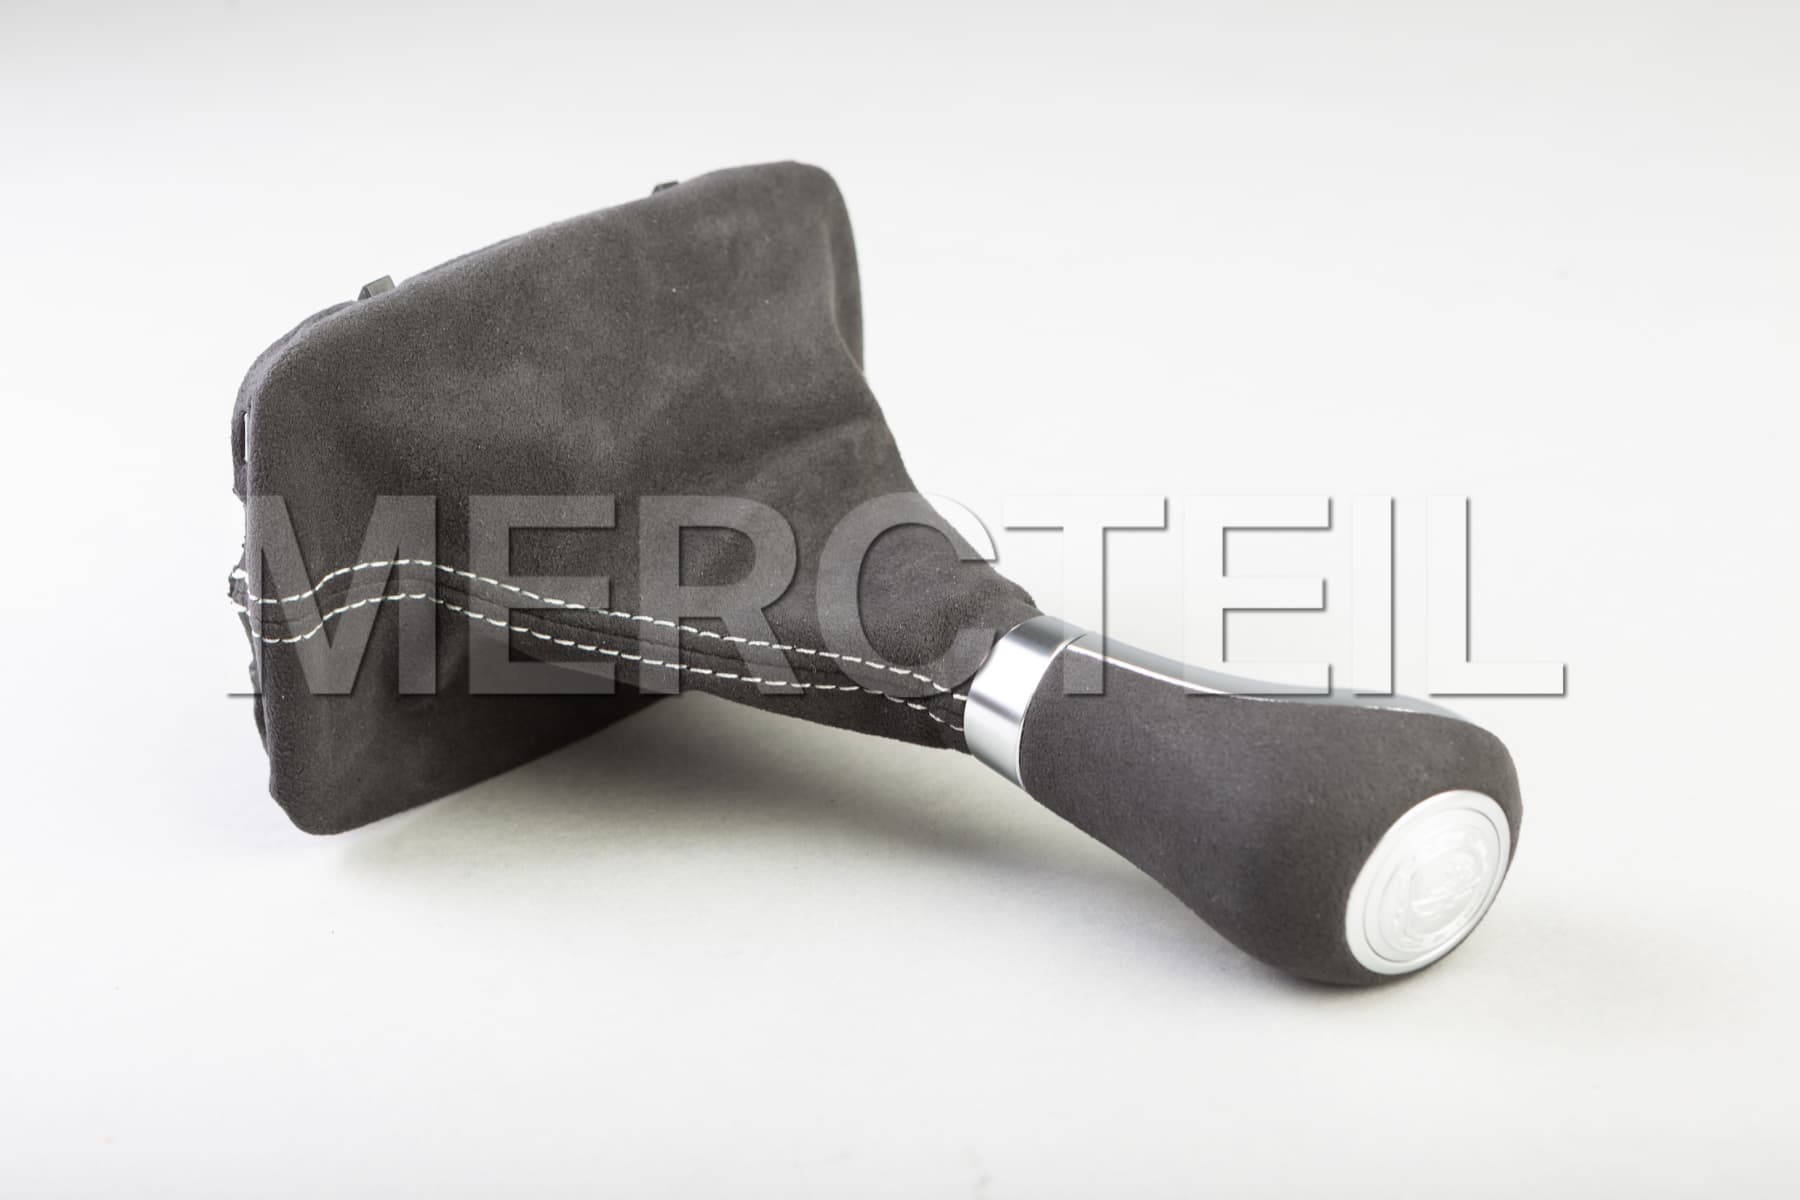 C-Class C63 AMG EDITION 507 Selector Lever Shift Knob 204 Genuine Mercedes-AMG (Part number: A20426703009G60)